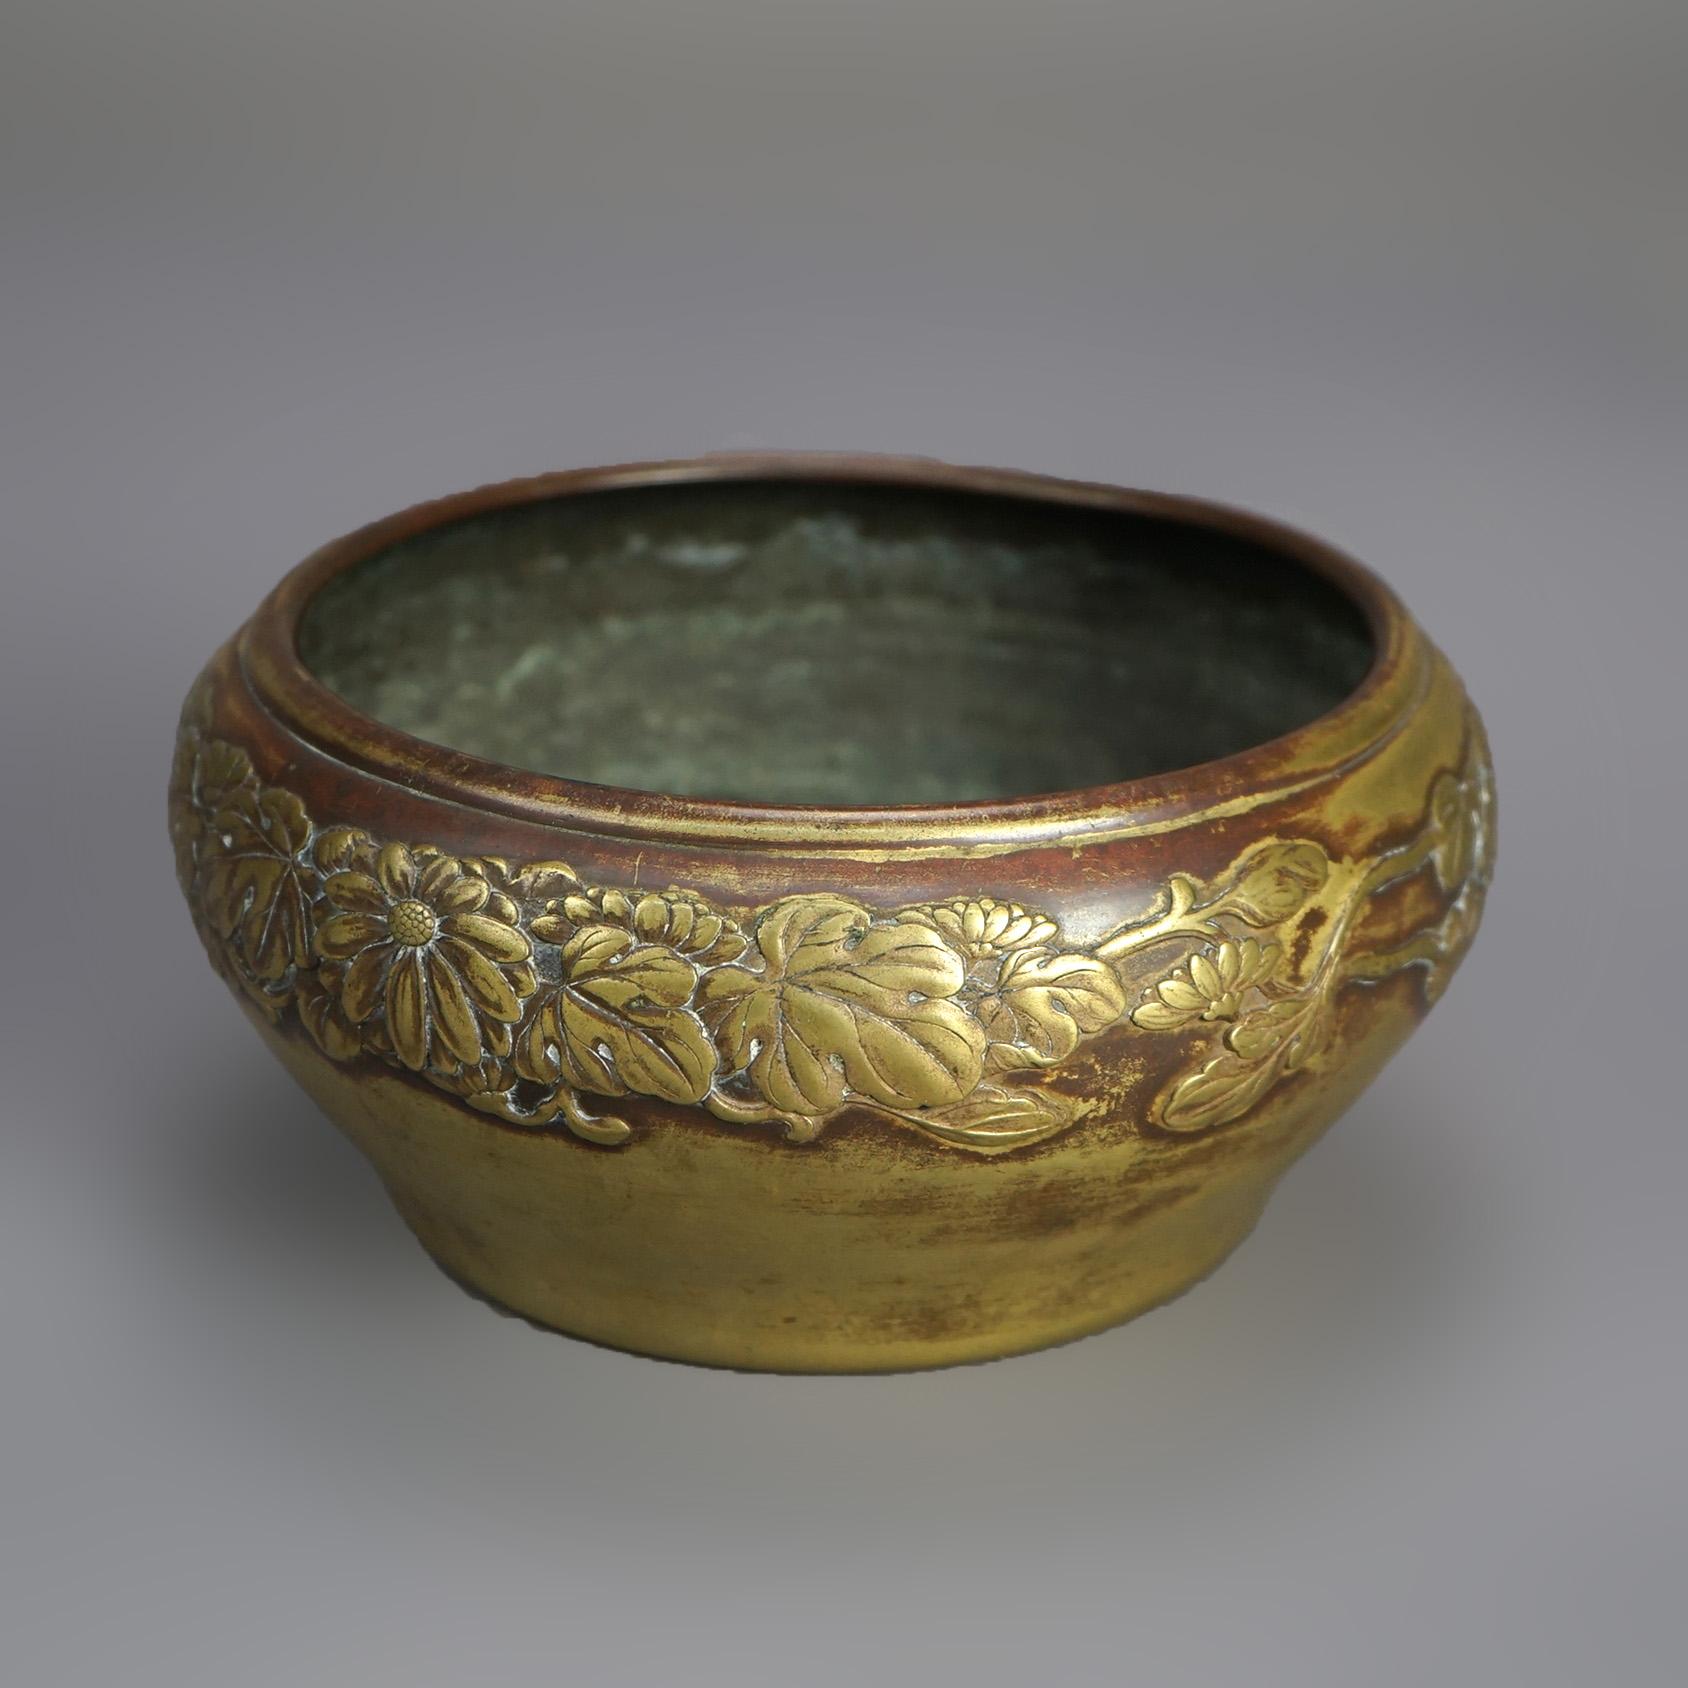 Antique Chinese Bronze Bowl with Embossed Floral Border, Stamped on base, 19thC

Measures- 3.5''H x 7.5''W x 7.5''D